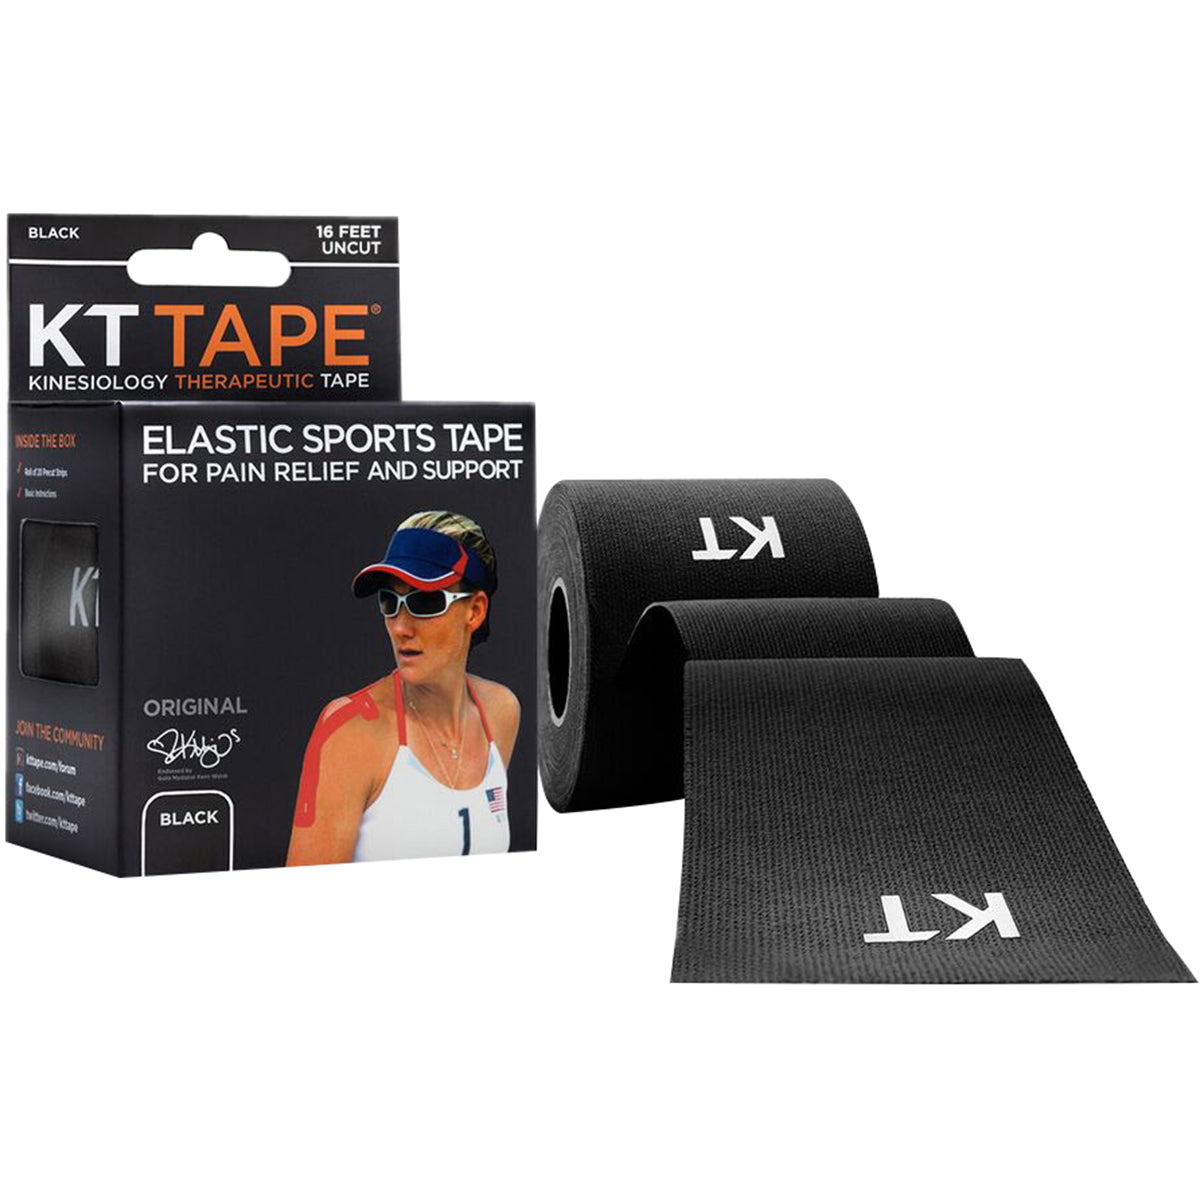 KT Tape Cotton 16 ft Uncut Kinesiology Therapeutic Elastic Sports Roll - Black KT Tape